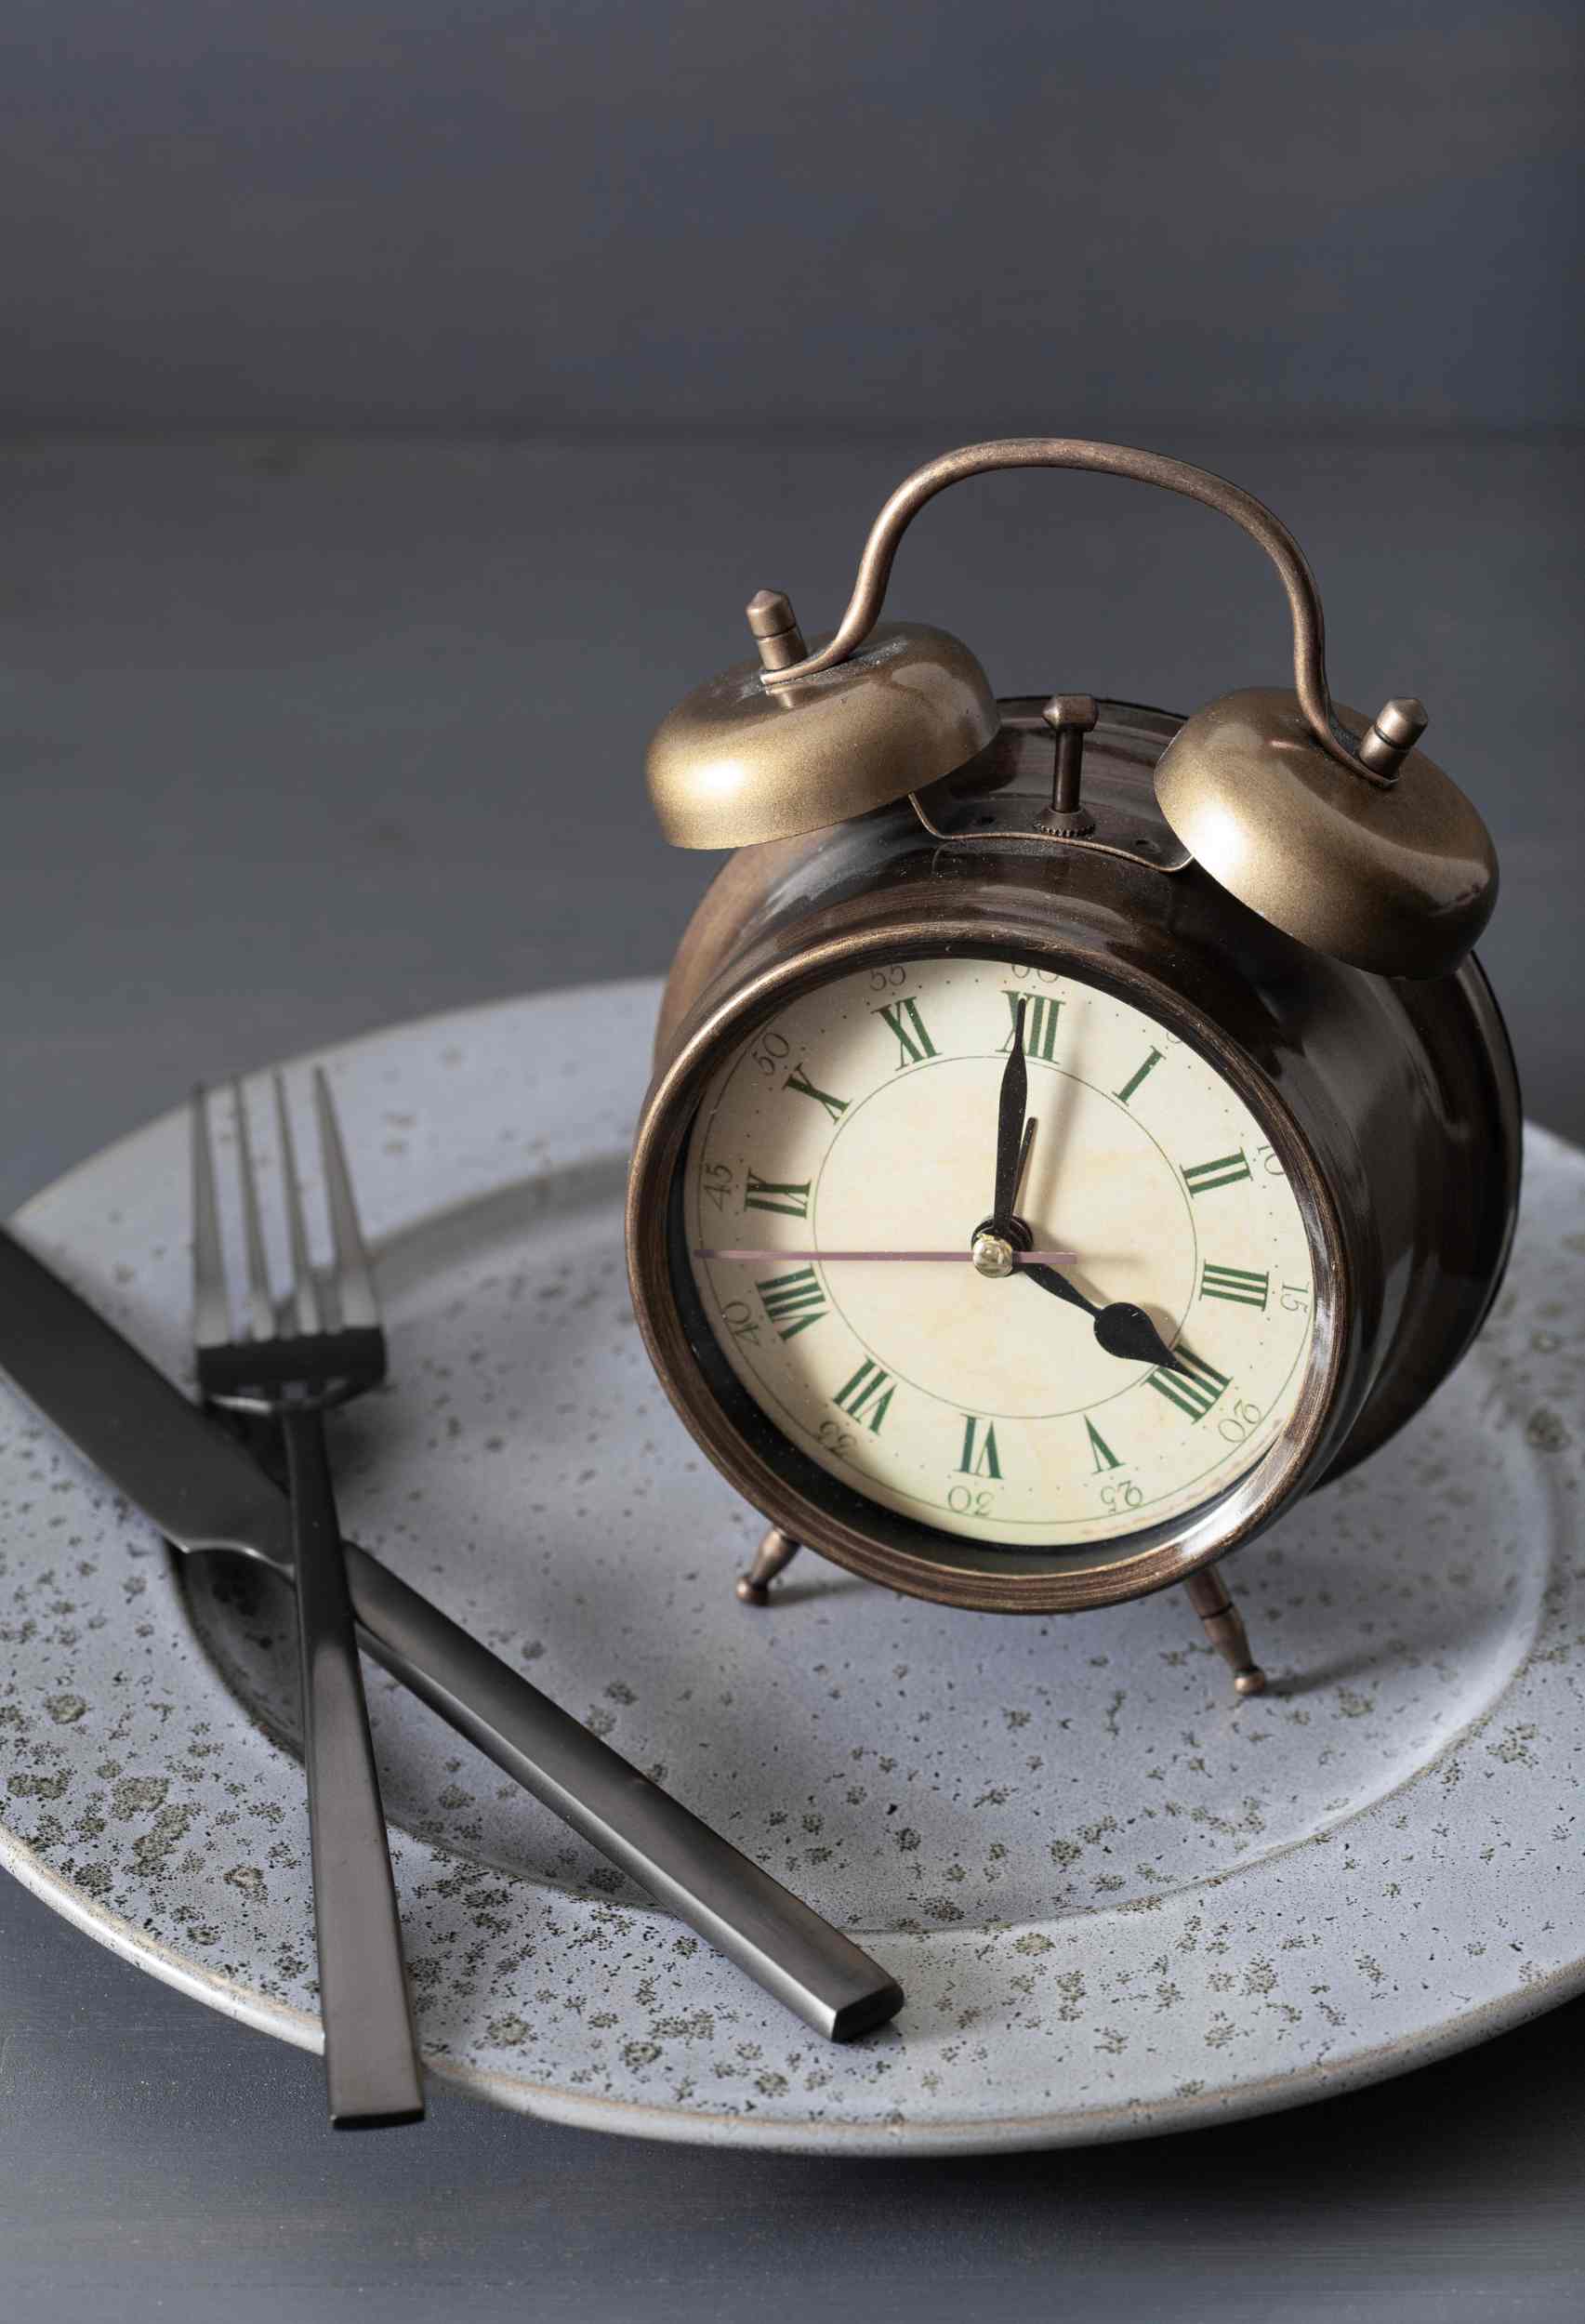 Intermittent Fasting Is Easy If You Do It Right - Here's How